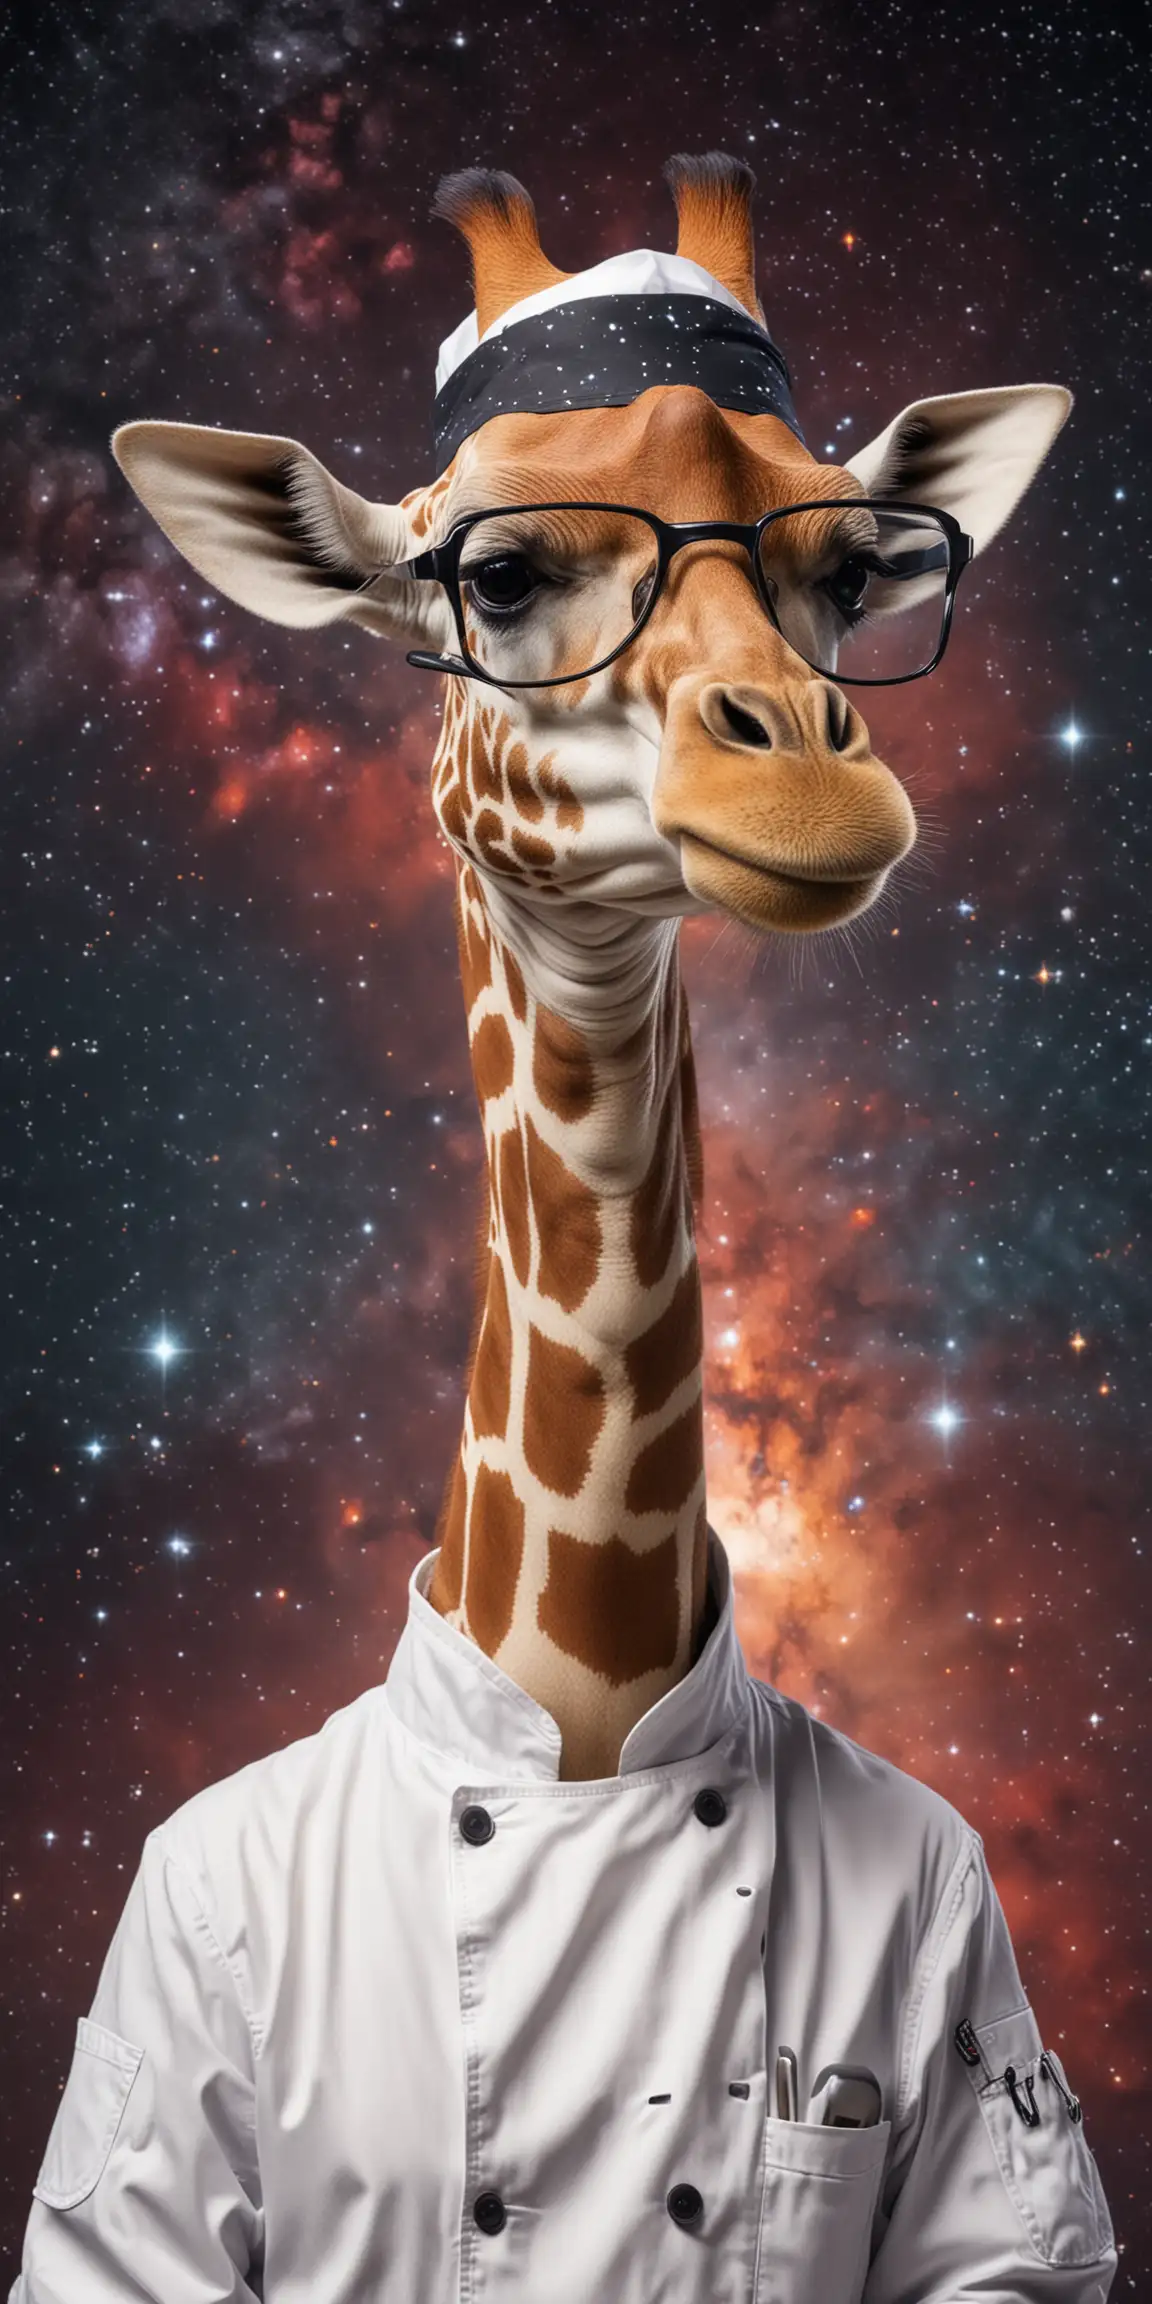 Giraffe Chef in Space Whimsical Animal Character with Glasses Cooking